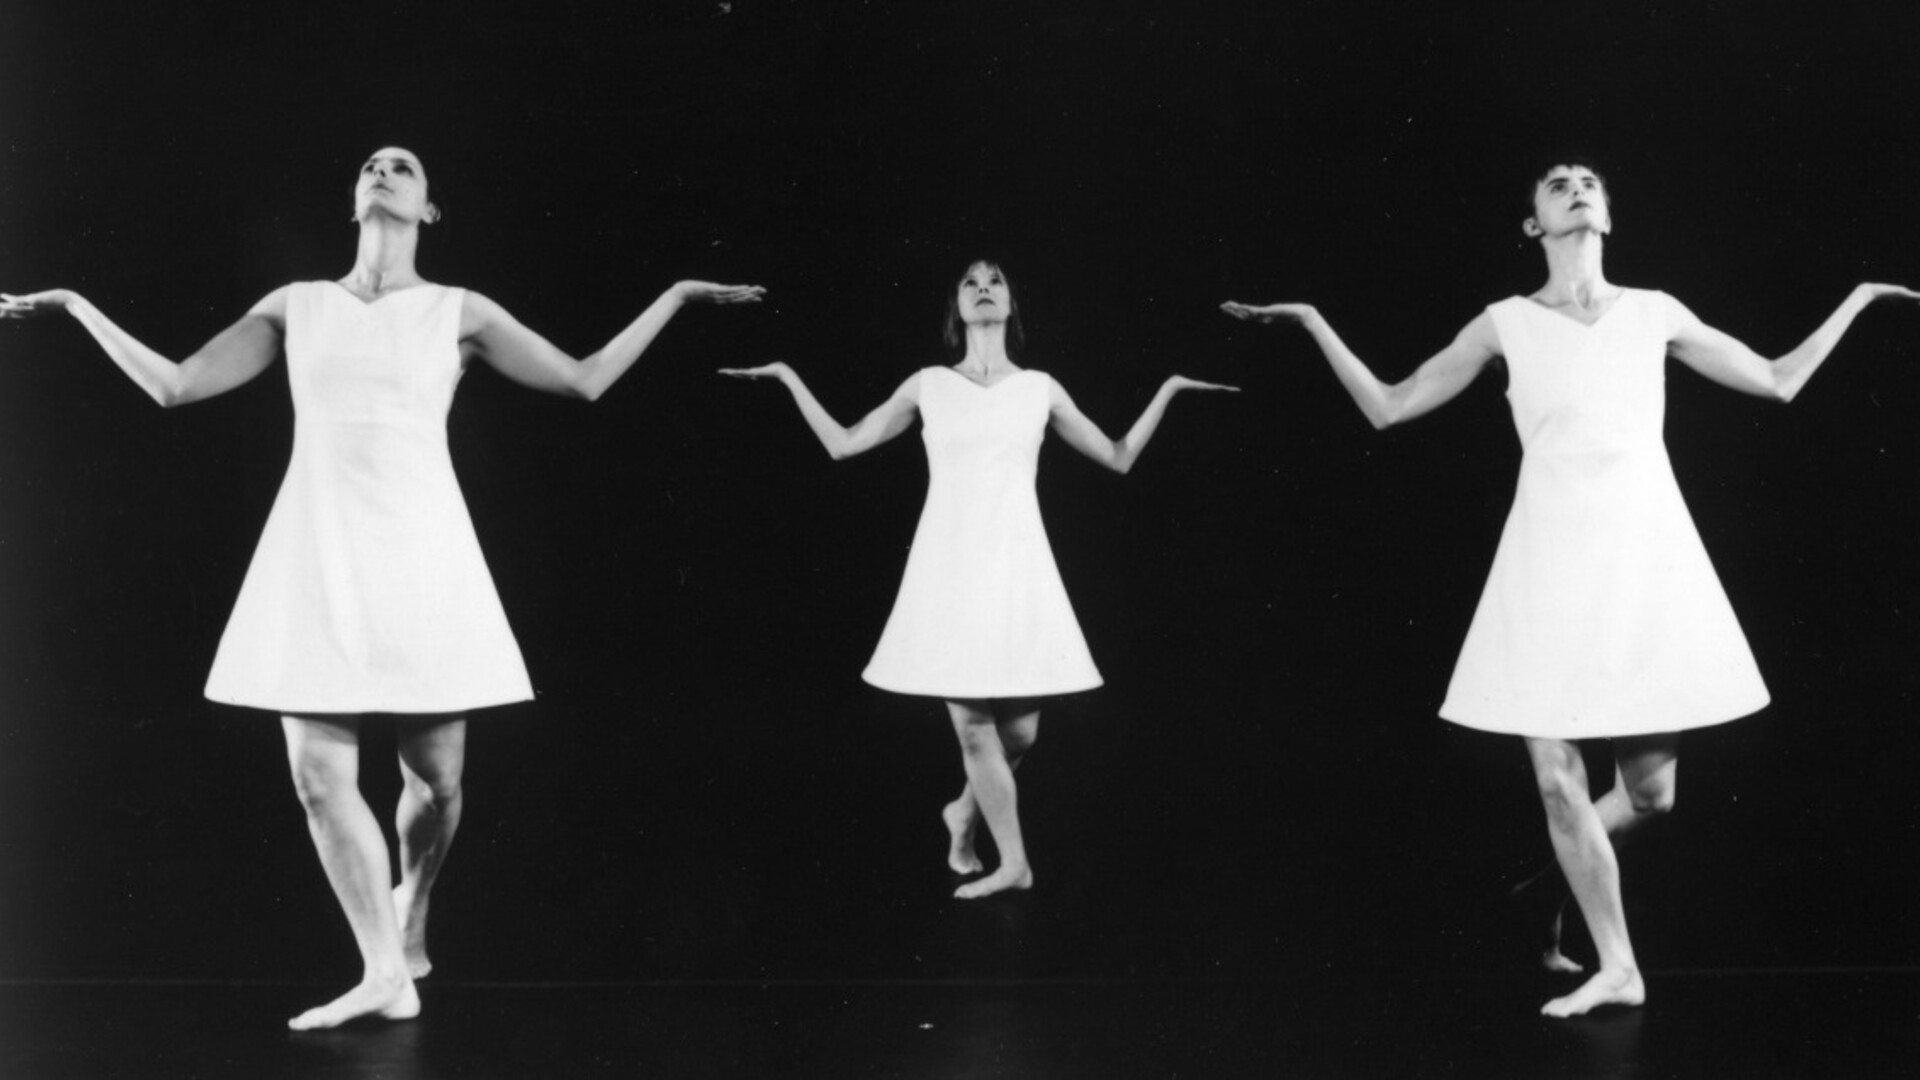 Three dancers in short triangular white dresses stand in identical postures, with arms bend from their sides, palms up and looking up